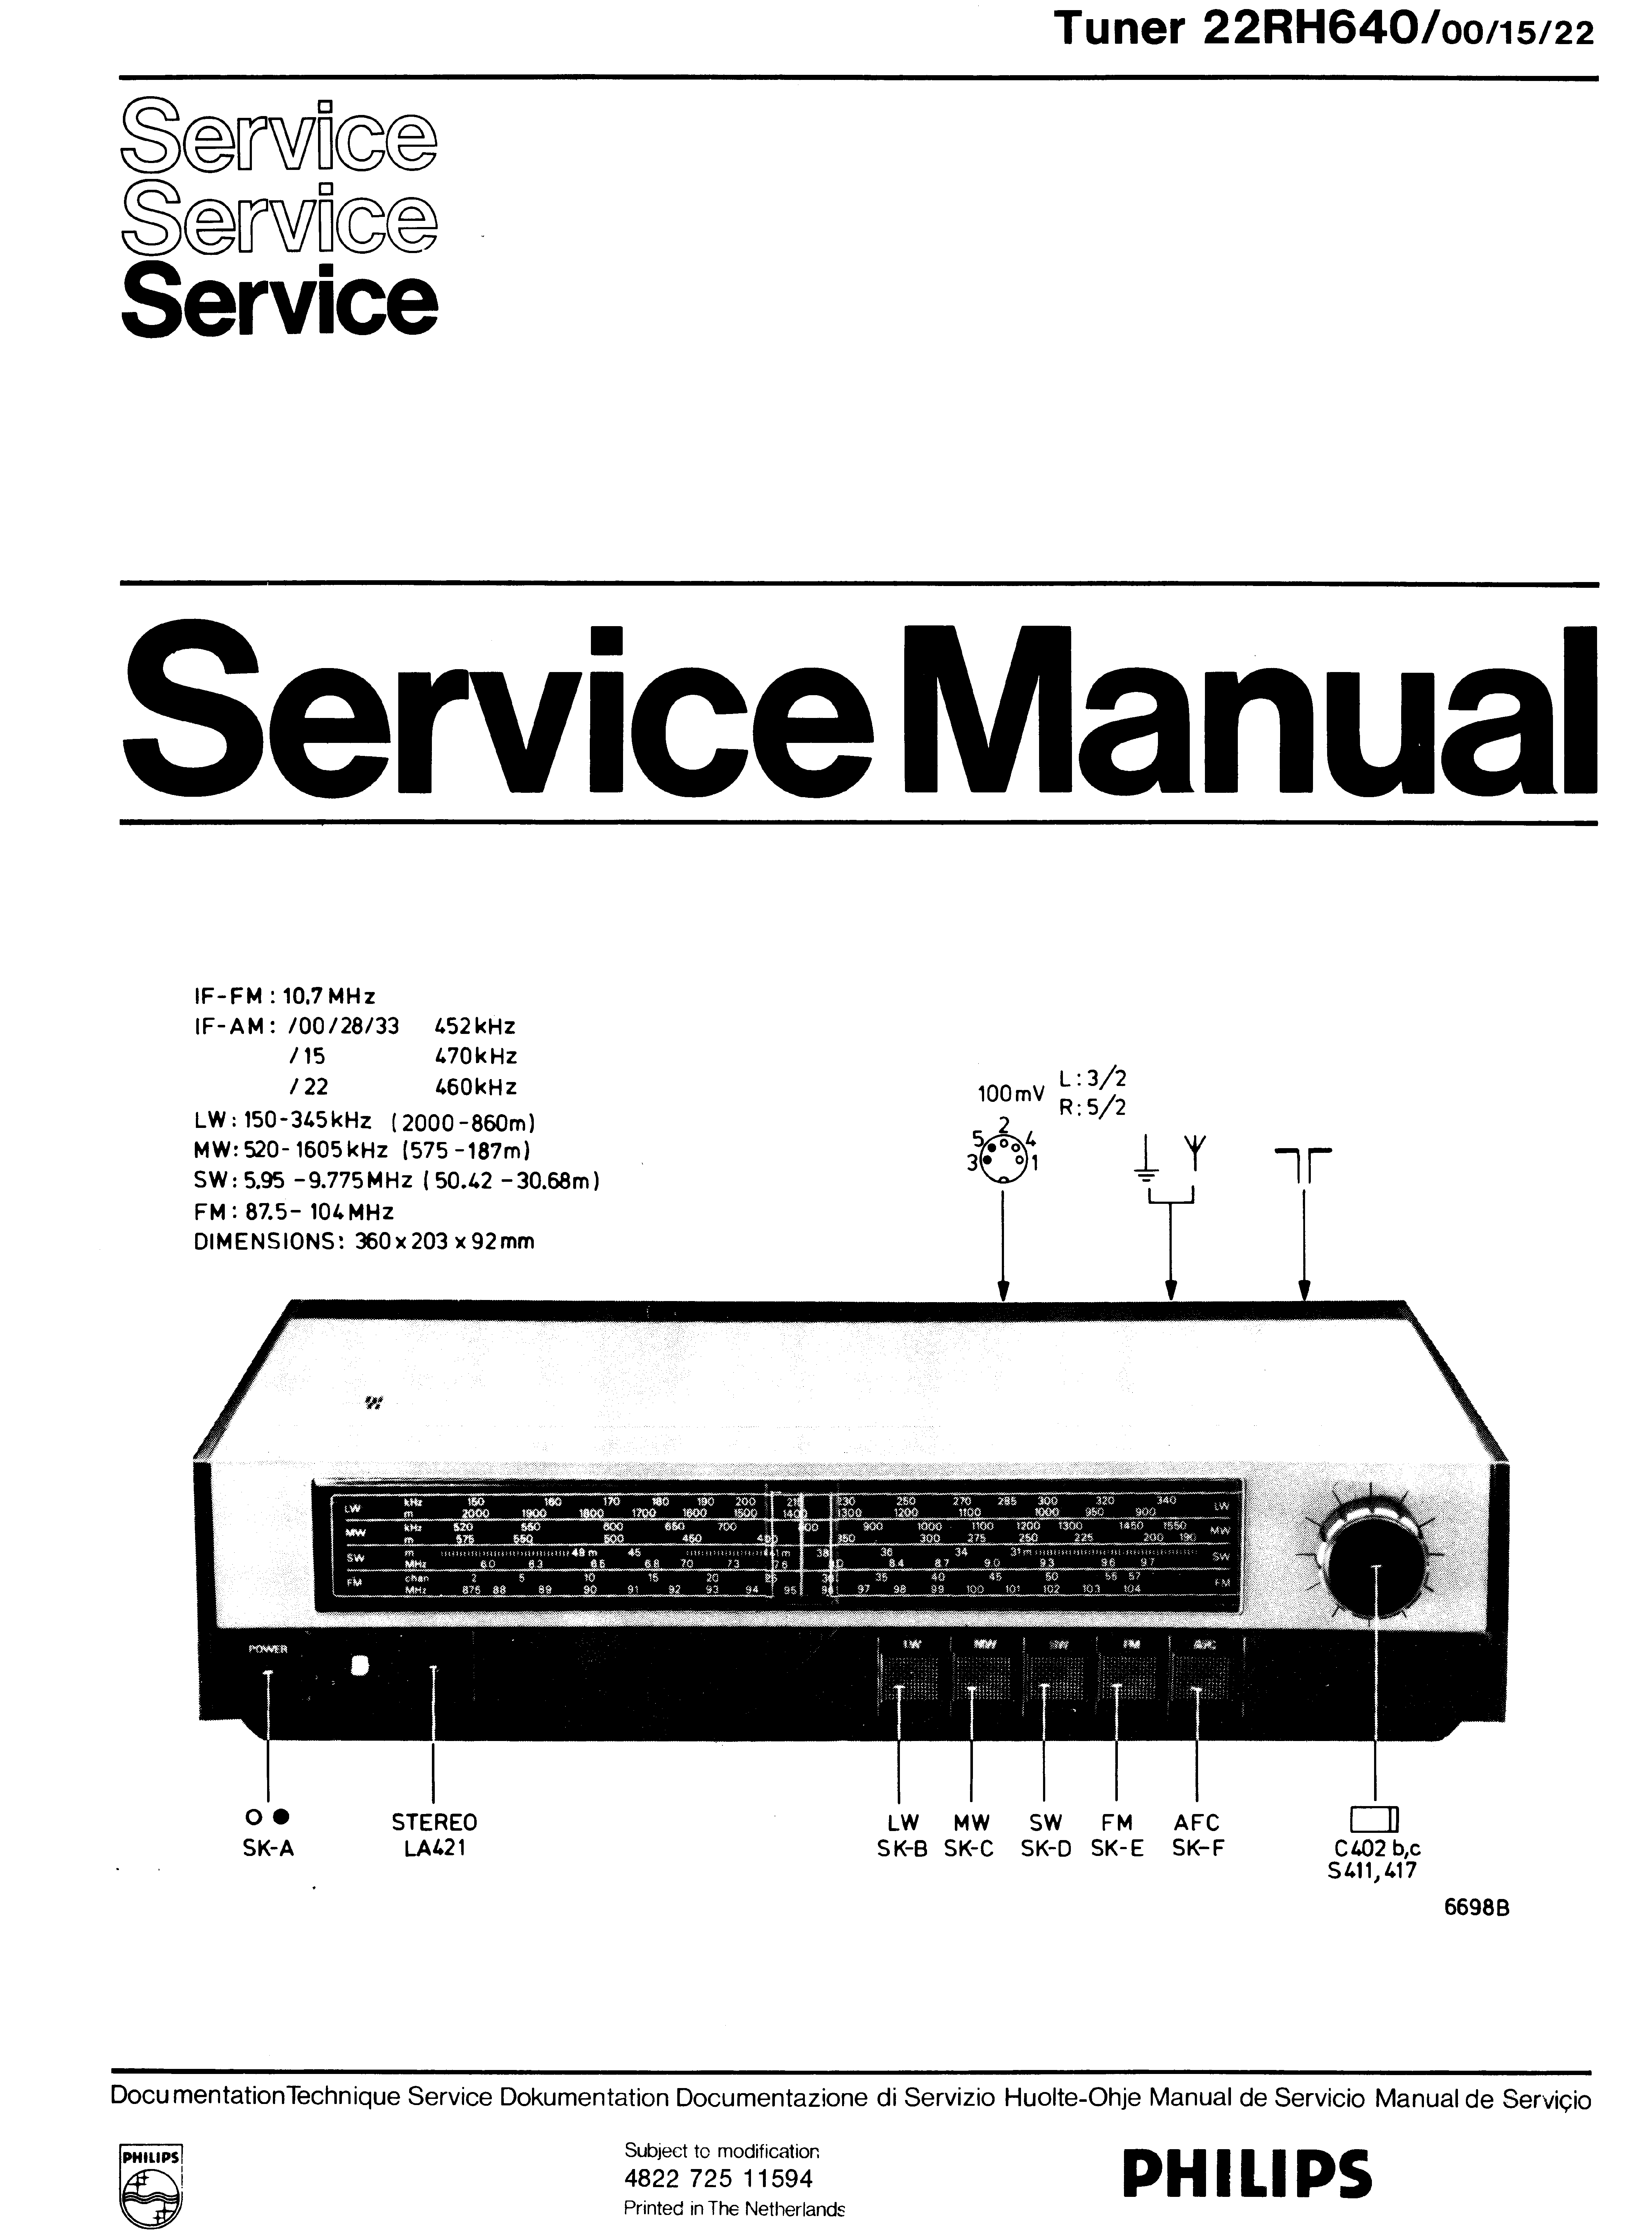 PHILIPS TUNER 22RH640 SM service manual (1st page)